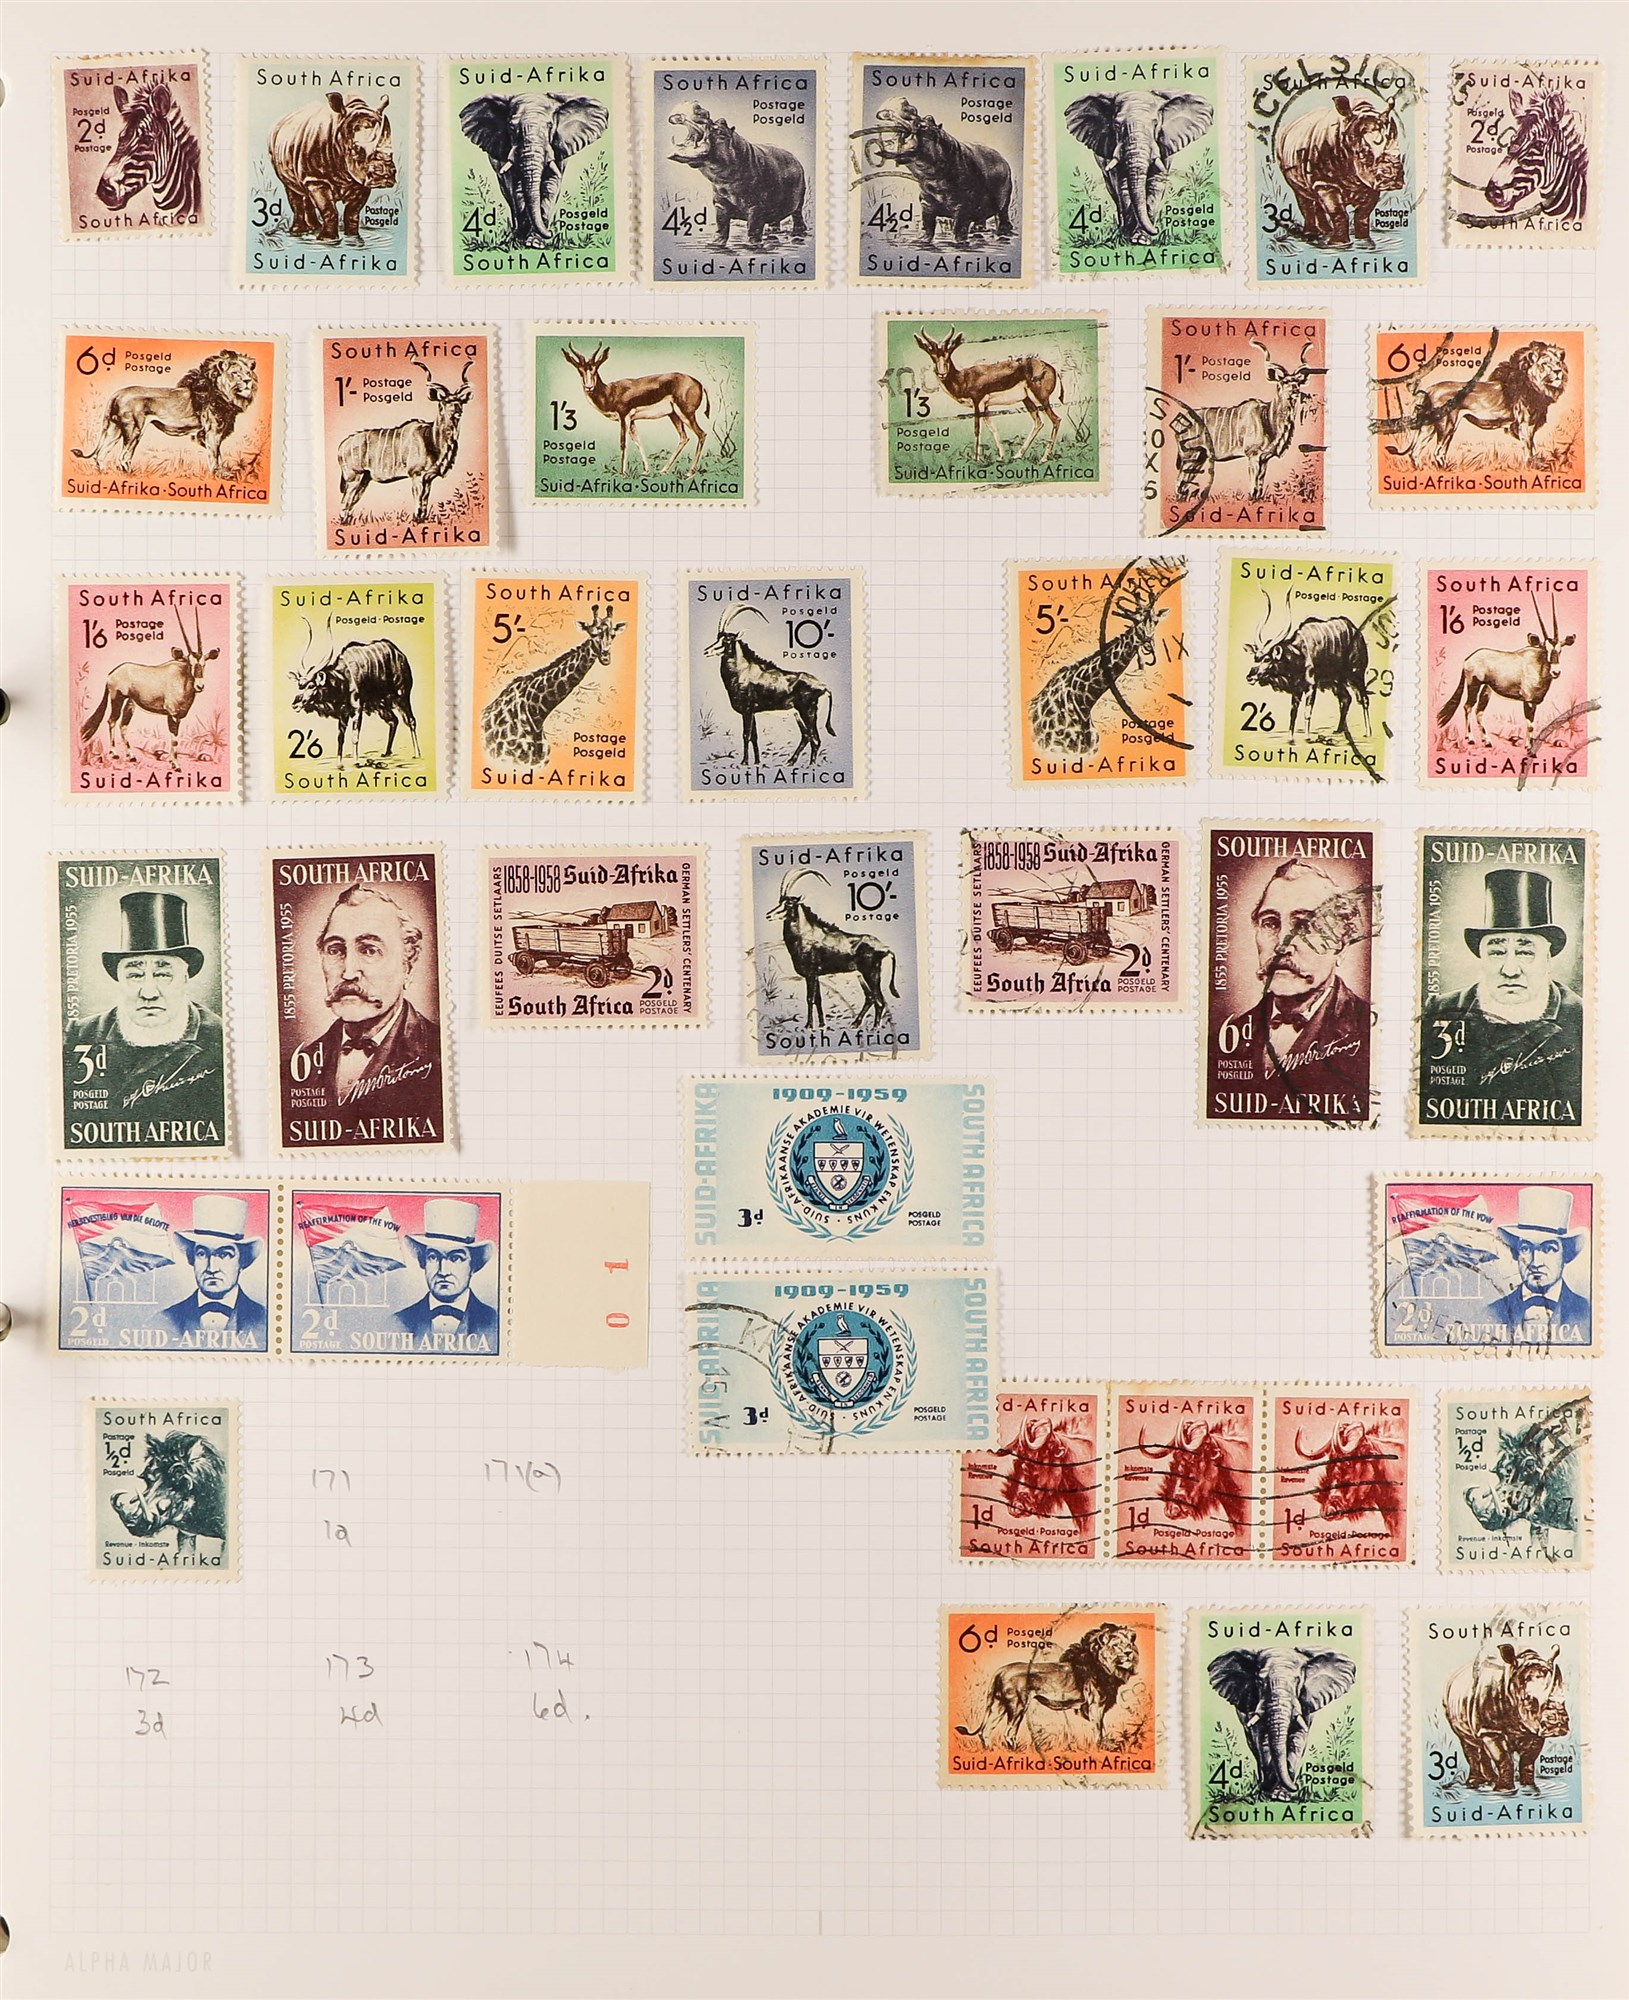 SOUTH AFRICA 1910 - 2010 COLLECTION of mint & used stamps in album, many high values, sets (2200+ - Image 9 of 17